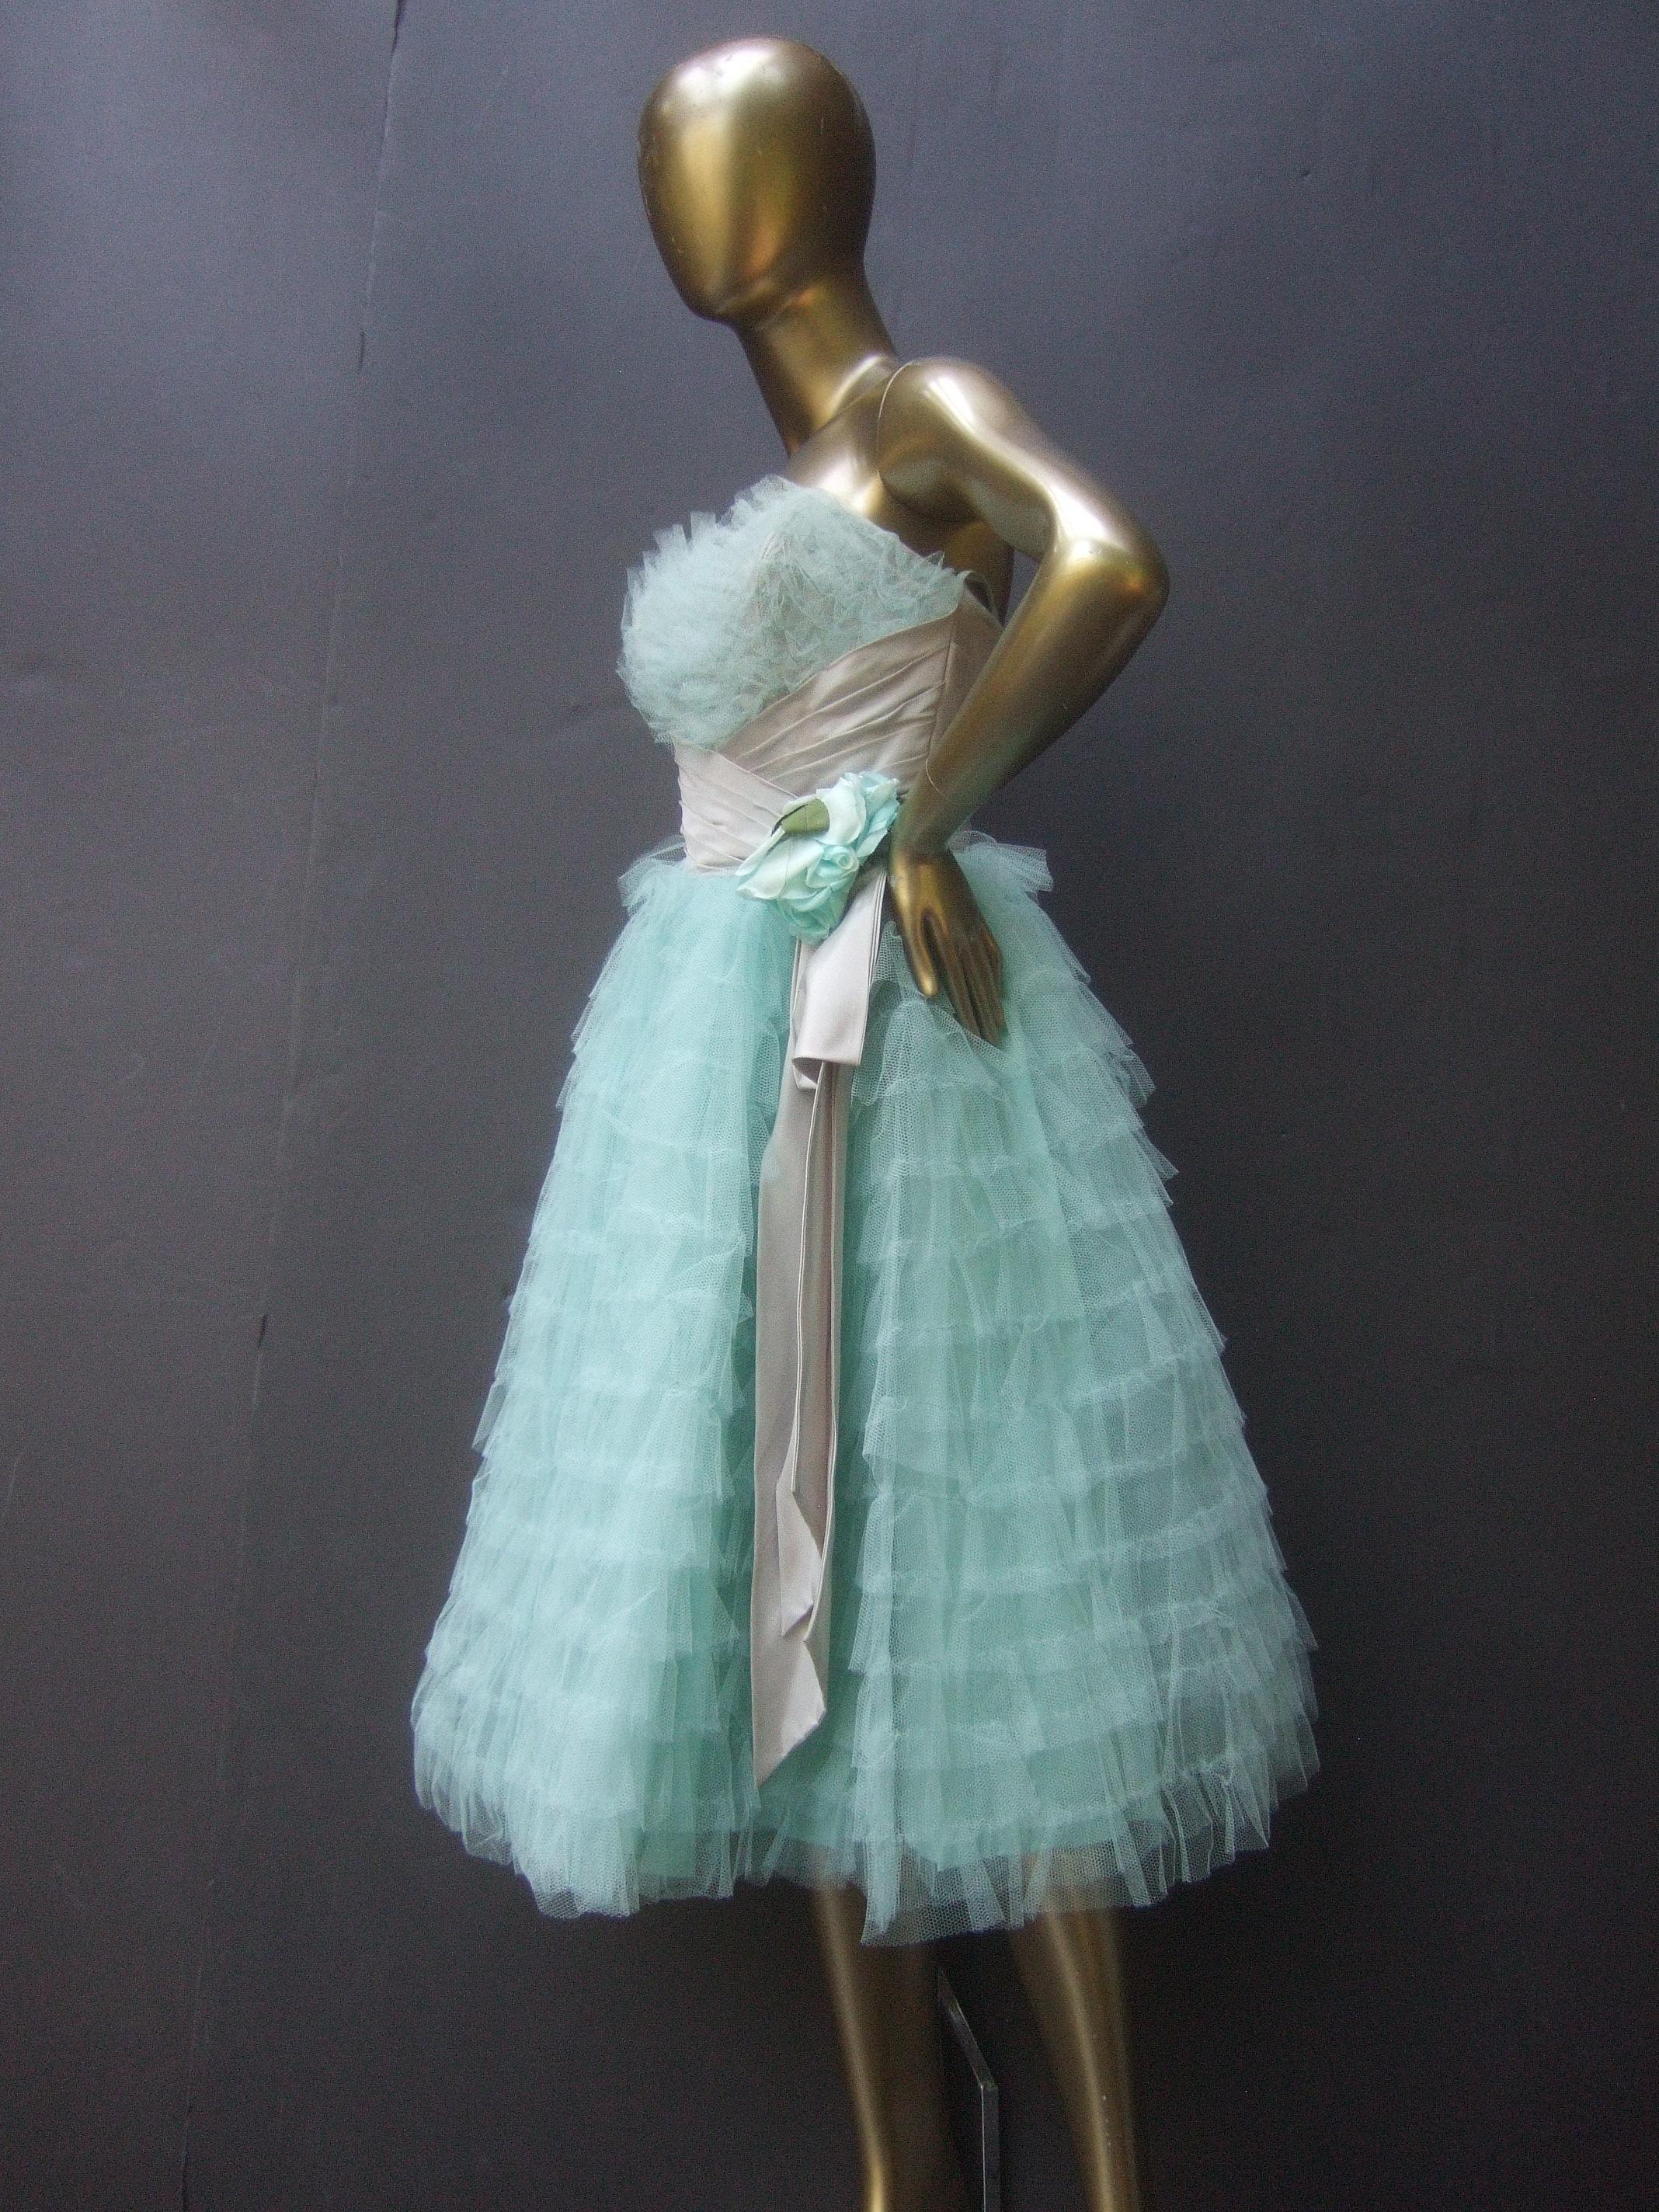 Saks Fifth Avenue Frothy robin's egg pale blue tulle dress c 1950s
The retro blast from the past tulle dress is designed with a pewter-tone ruched pleated satin stationary sash band that runs under the bodice and extends to the backside & drapes off